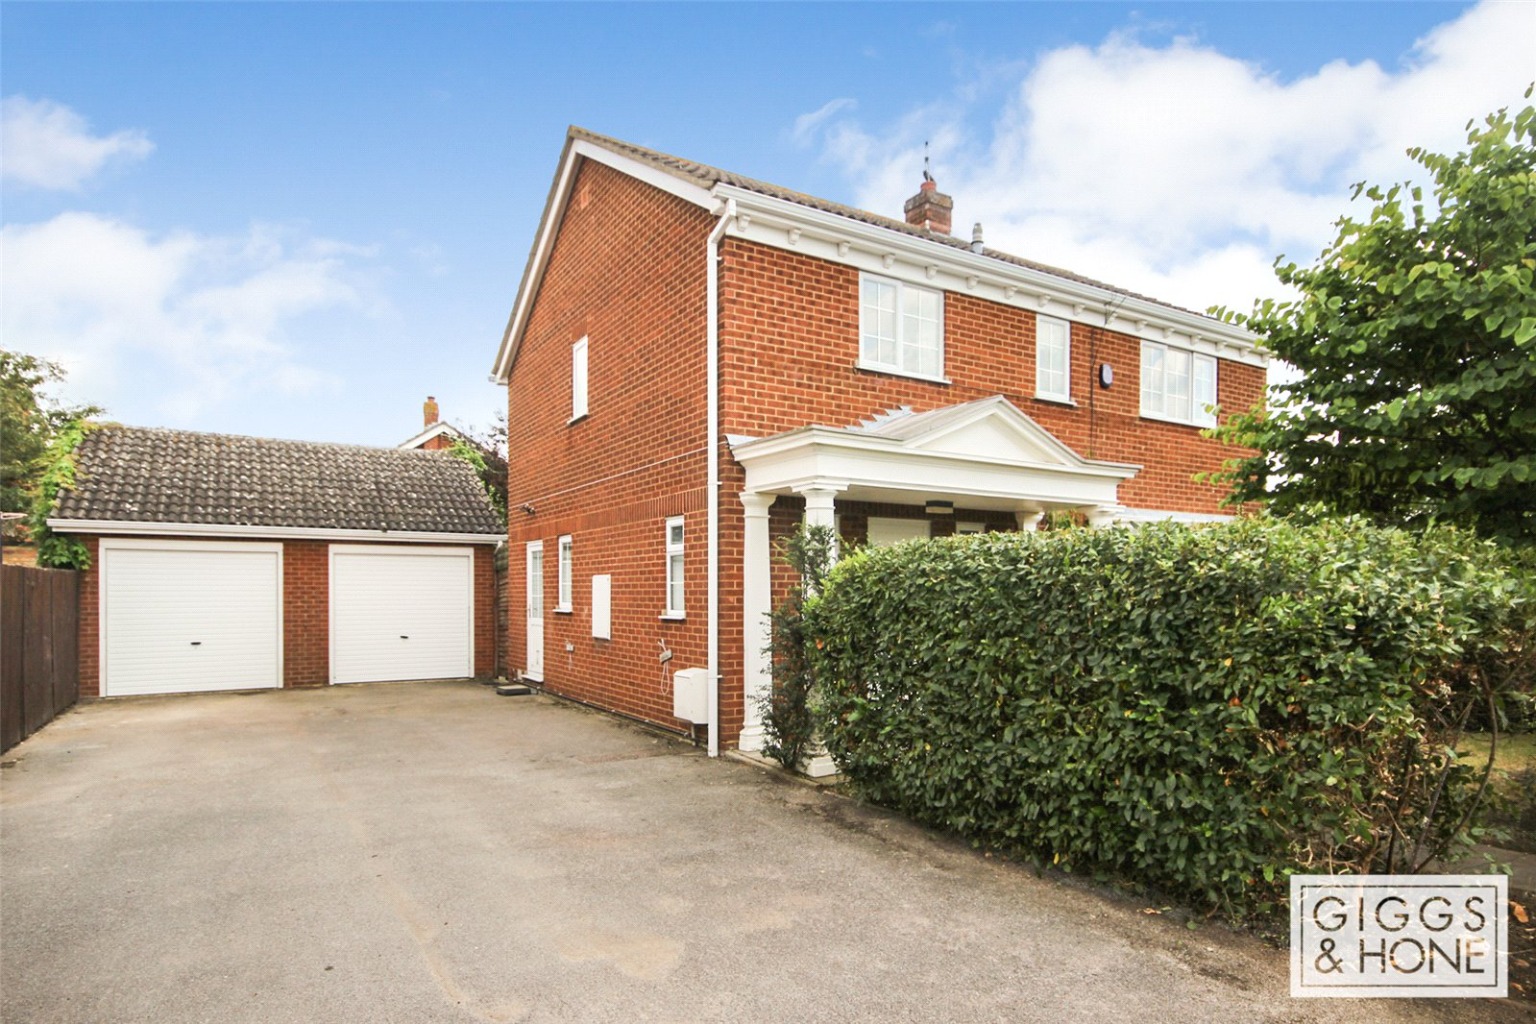 4 bed detached house for sale in Willow Springs, Bedford - Property Image 1